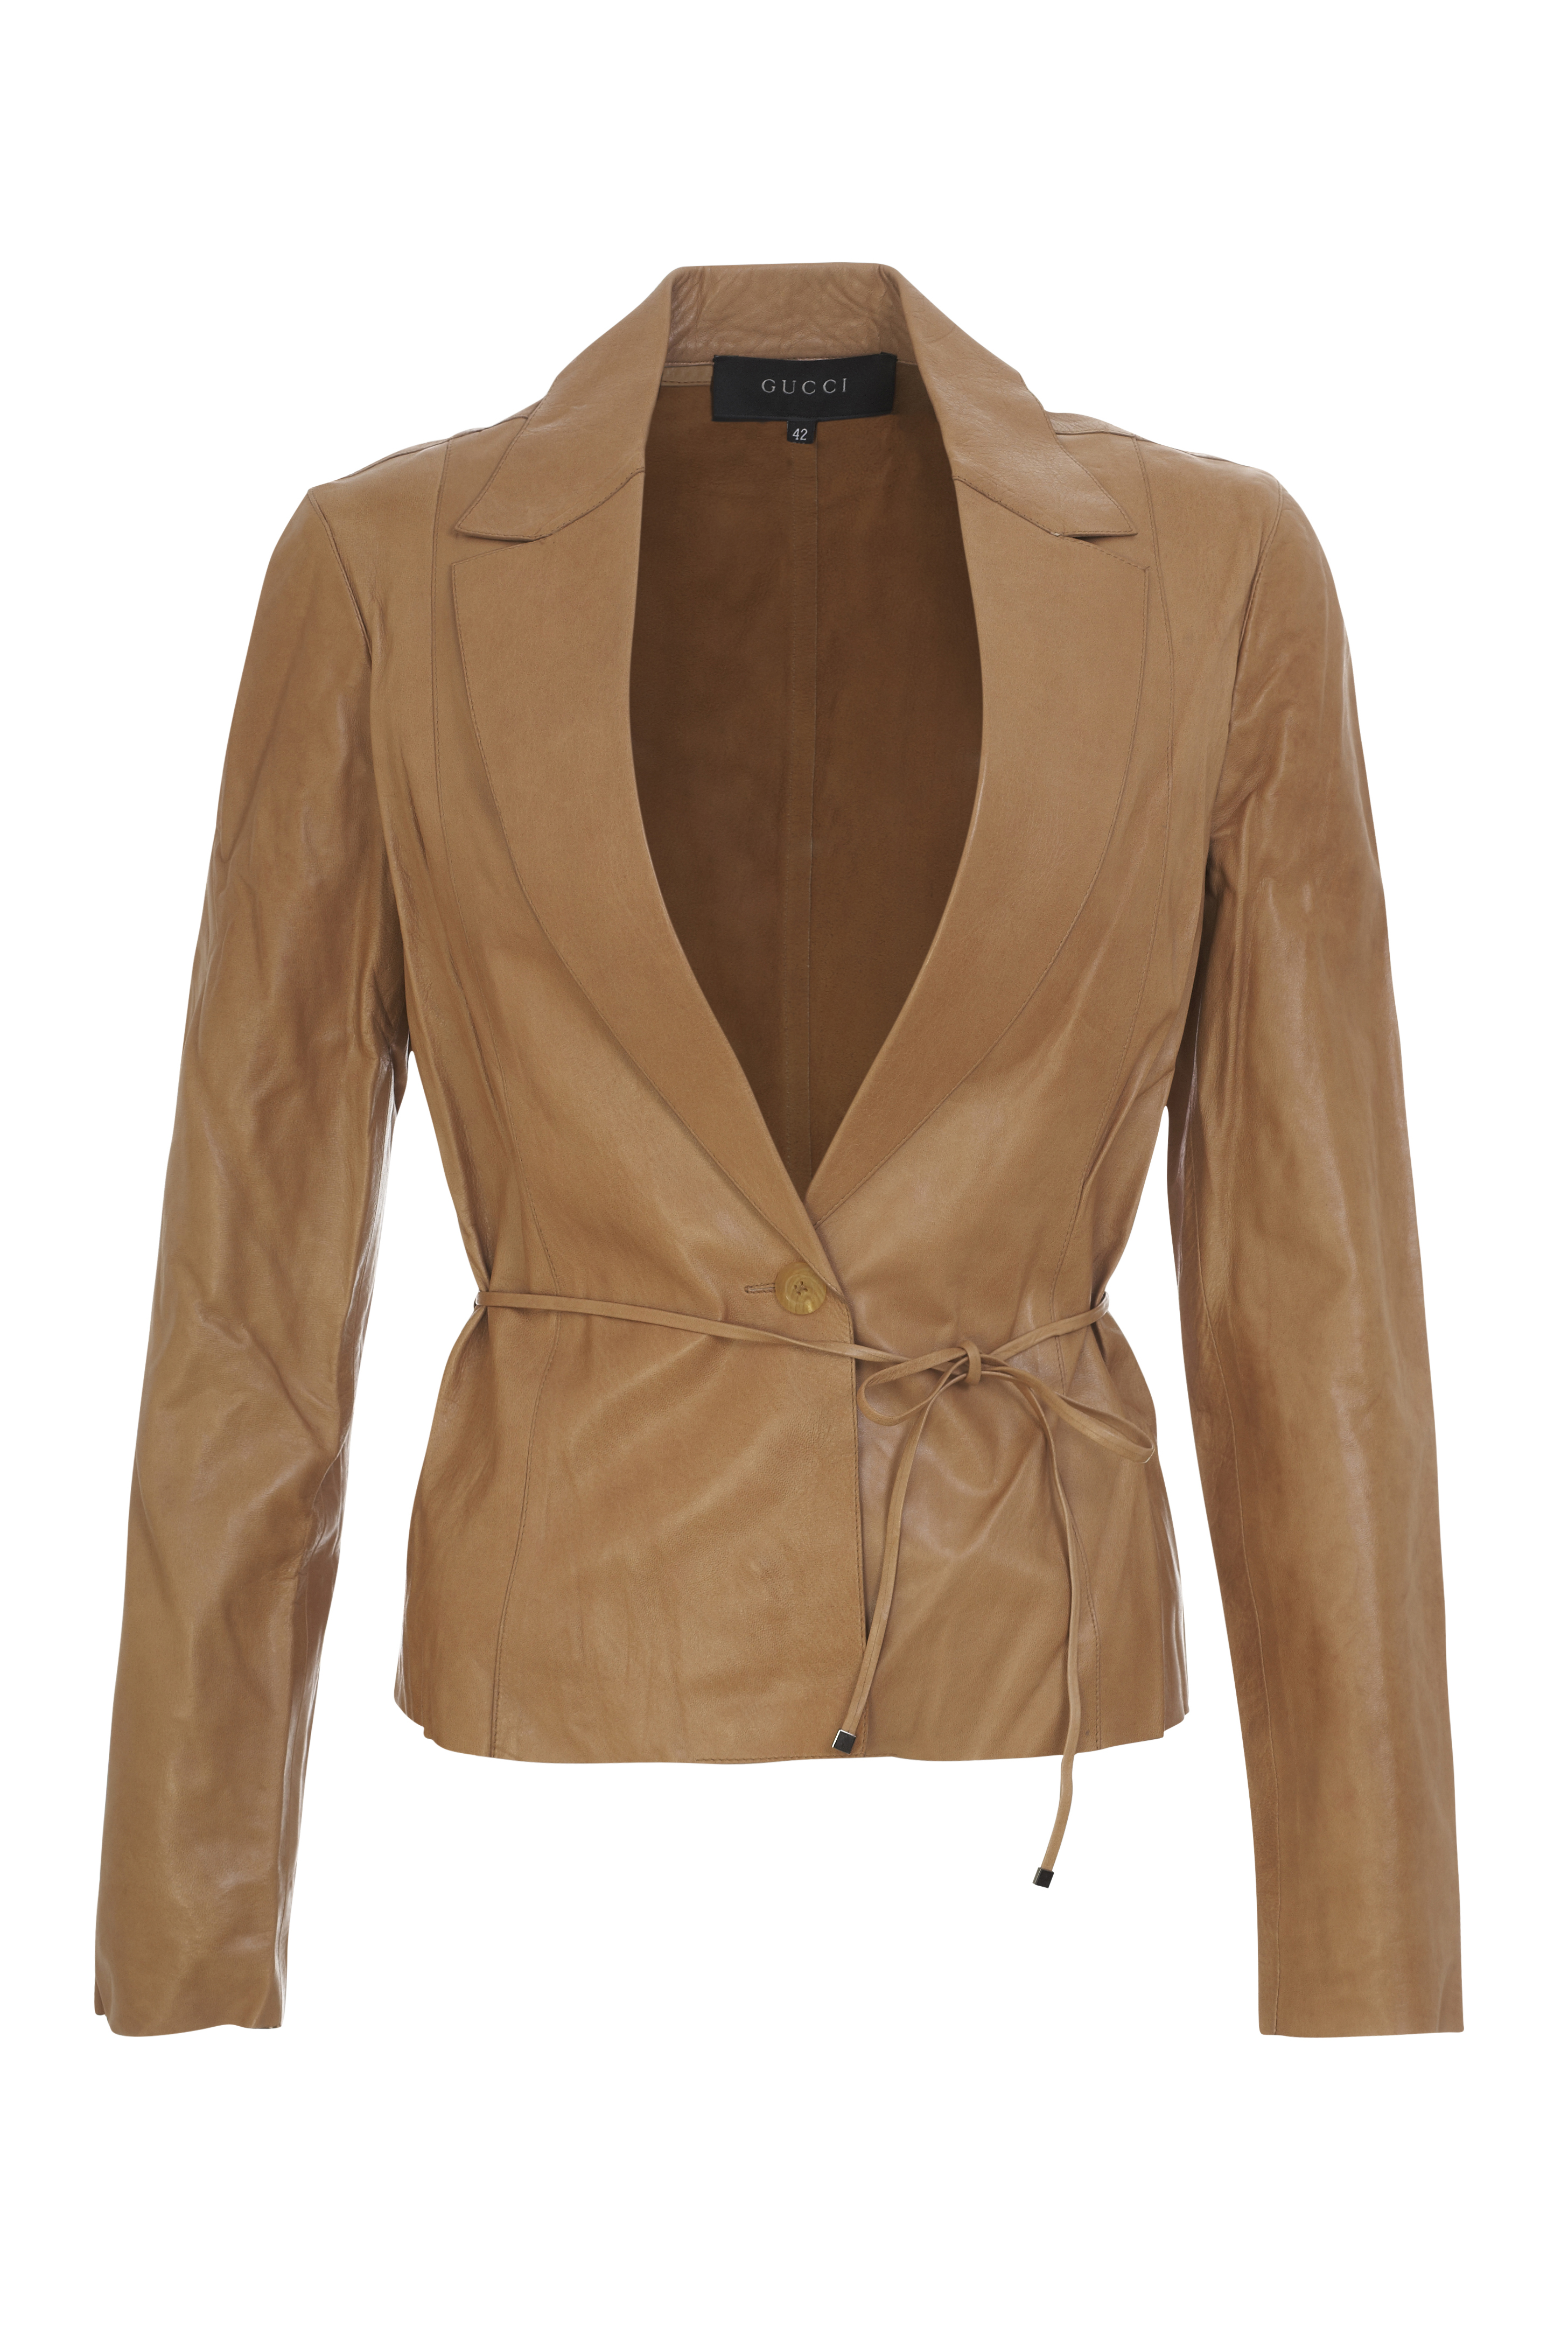 Gucci caramel leather jacket | Curate8